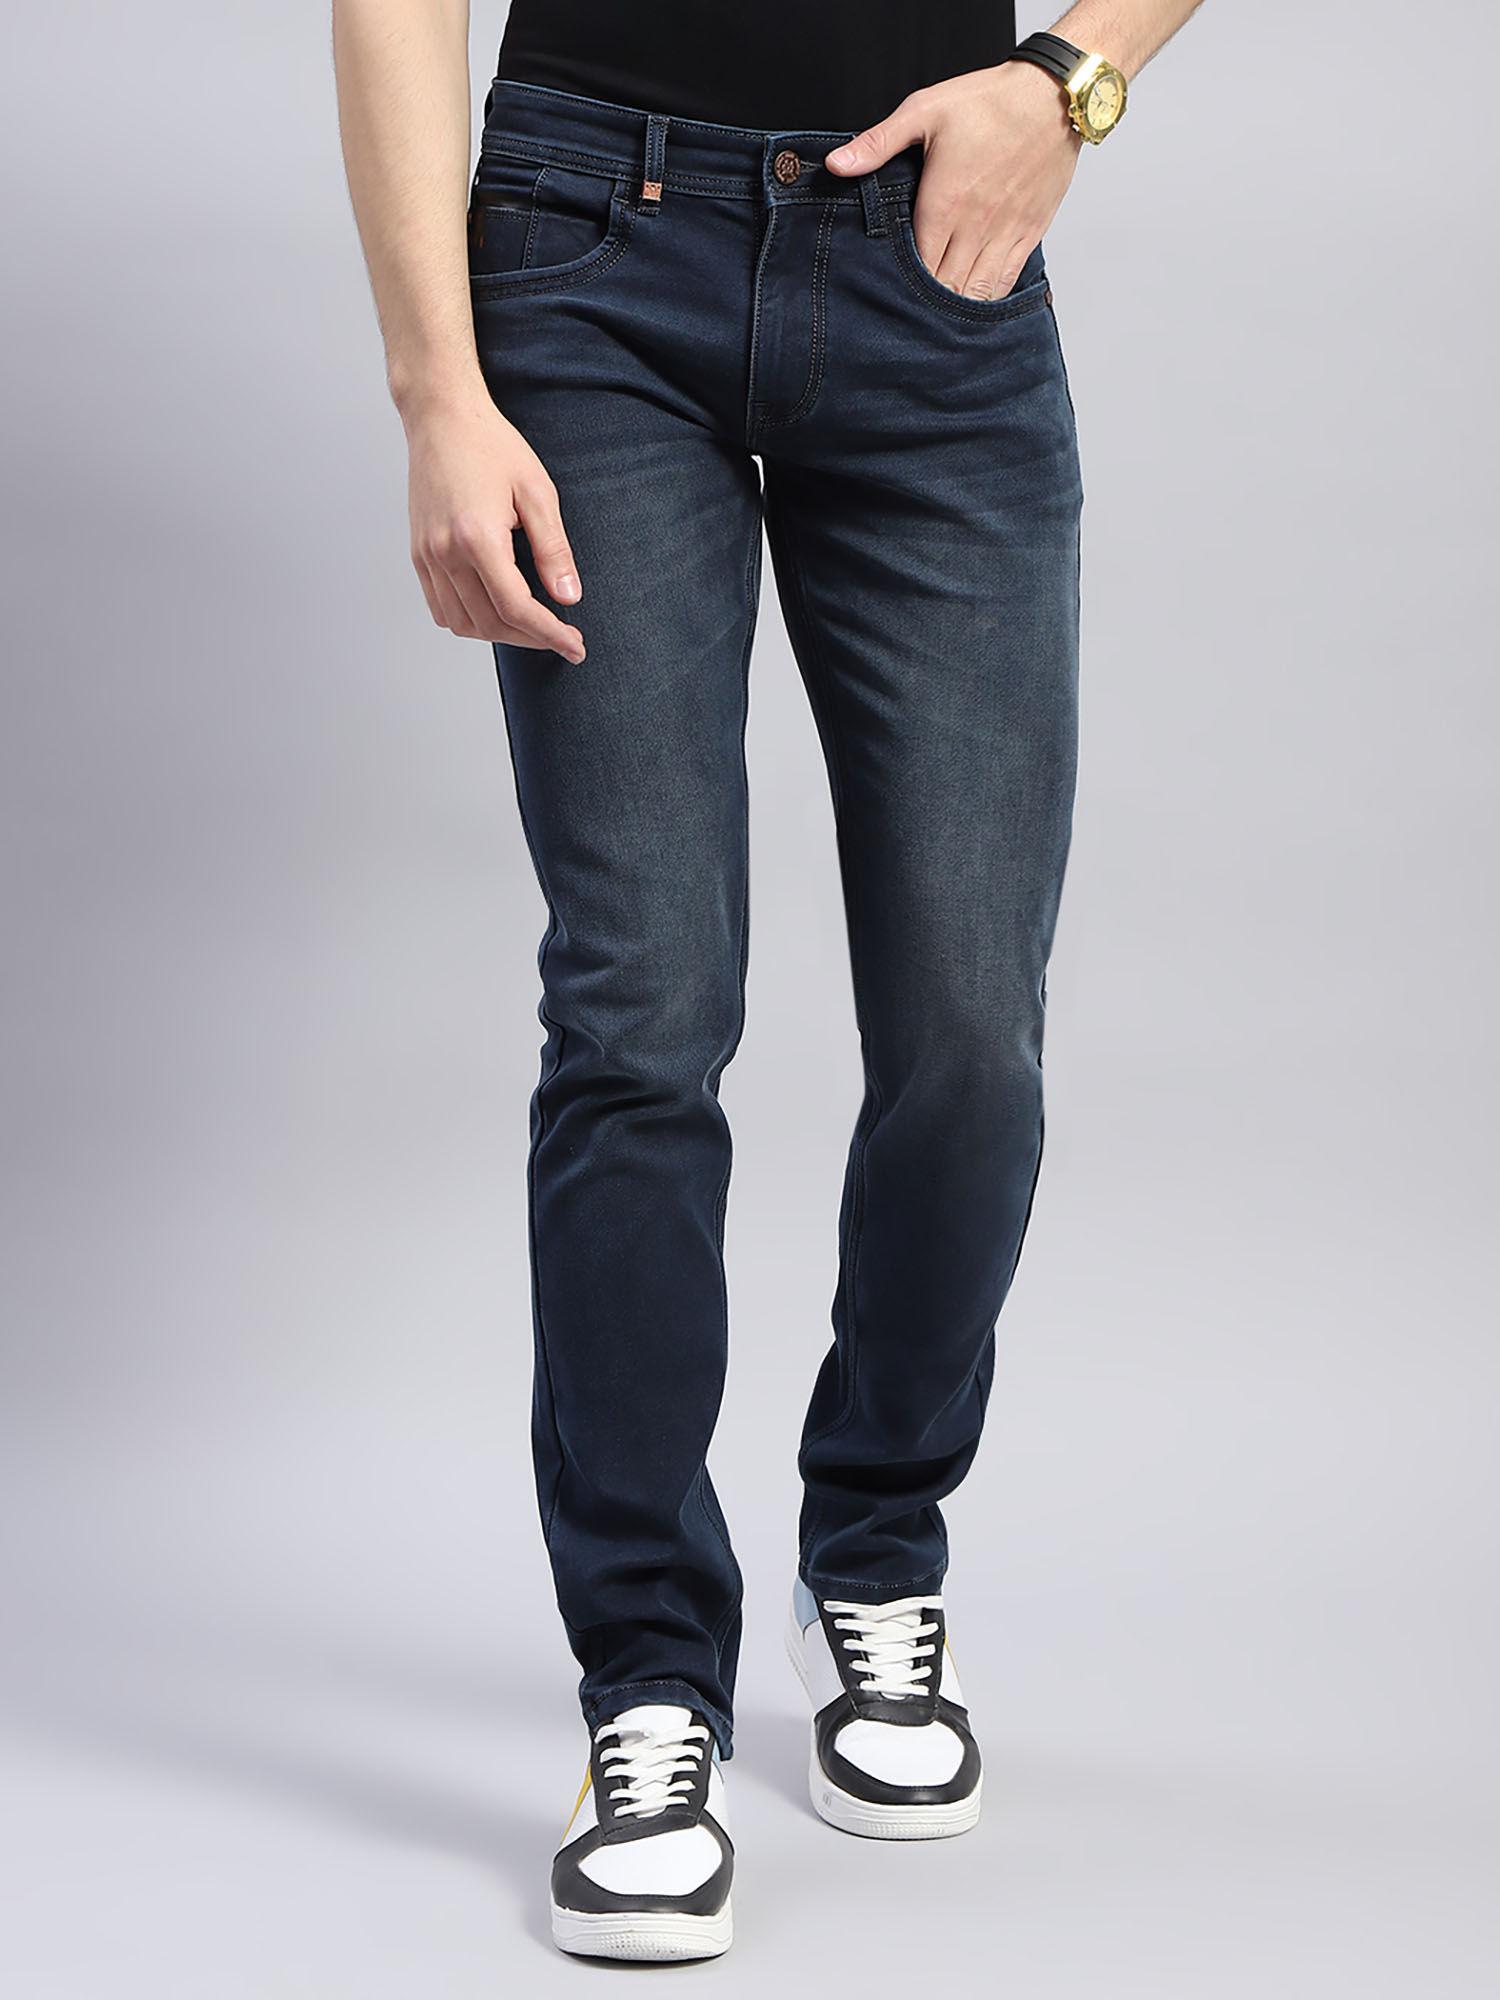 mens-solid-navy-blue-straight-fit-casual-jeans